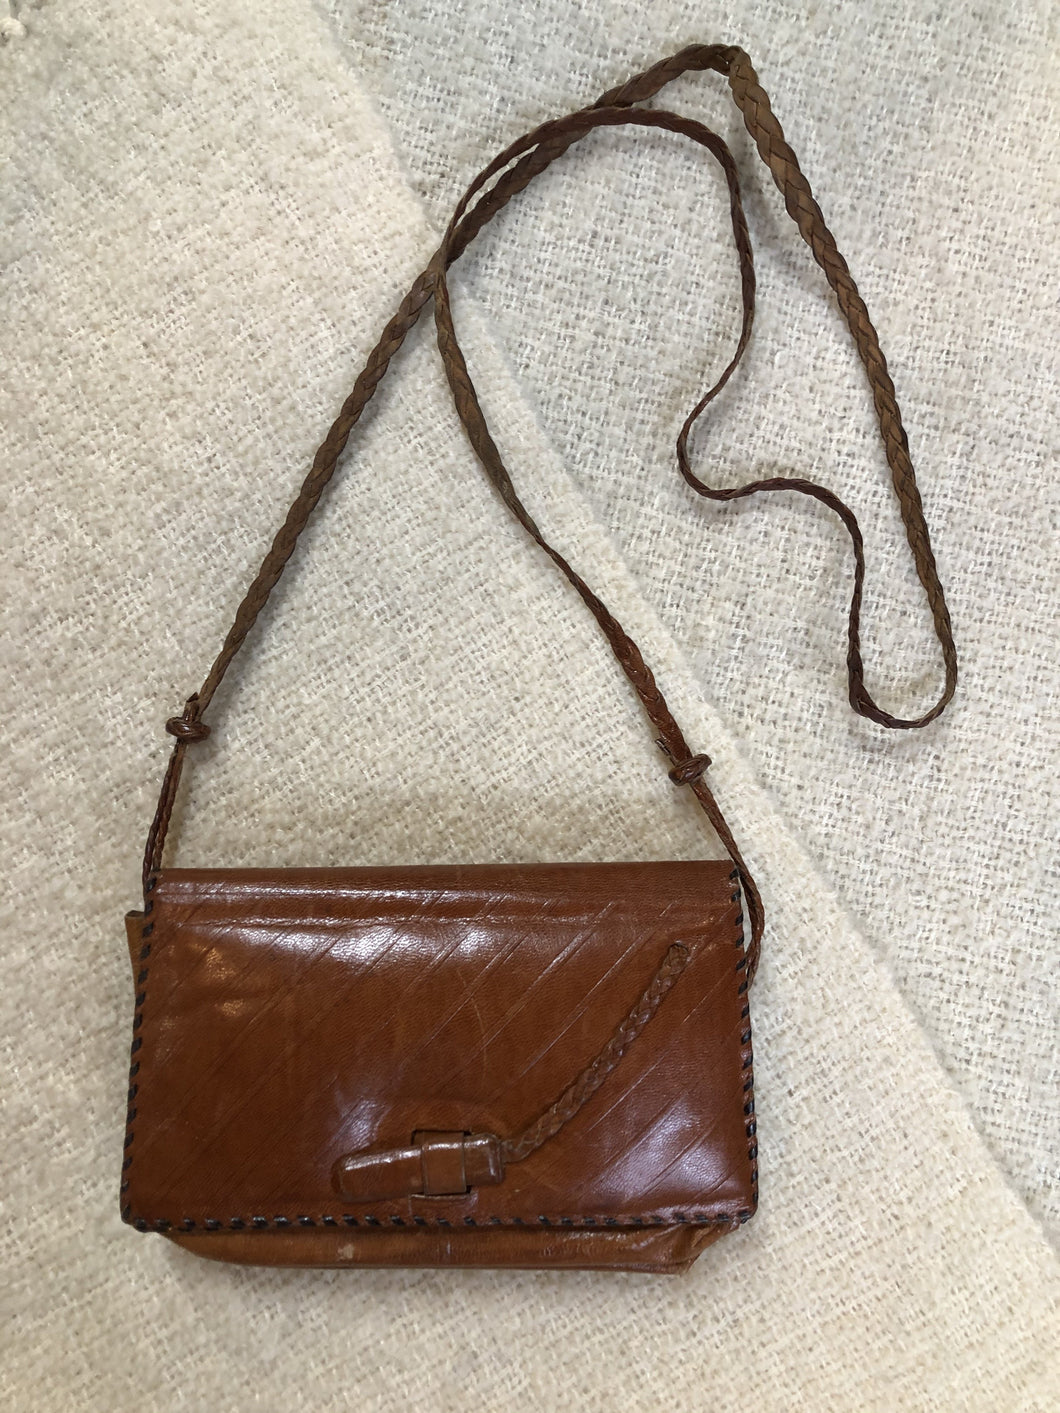 Vintage Brown Leather Crossbody Bag with Braided Strap